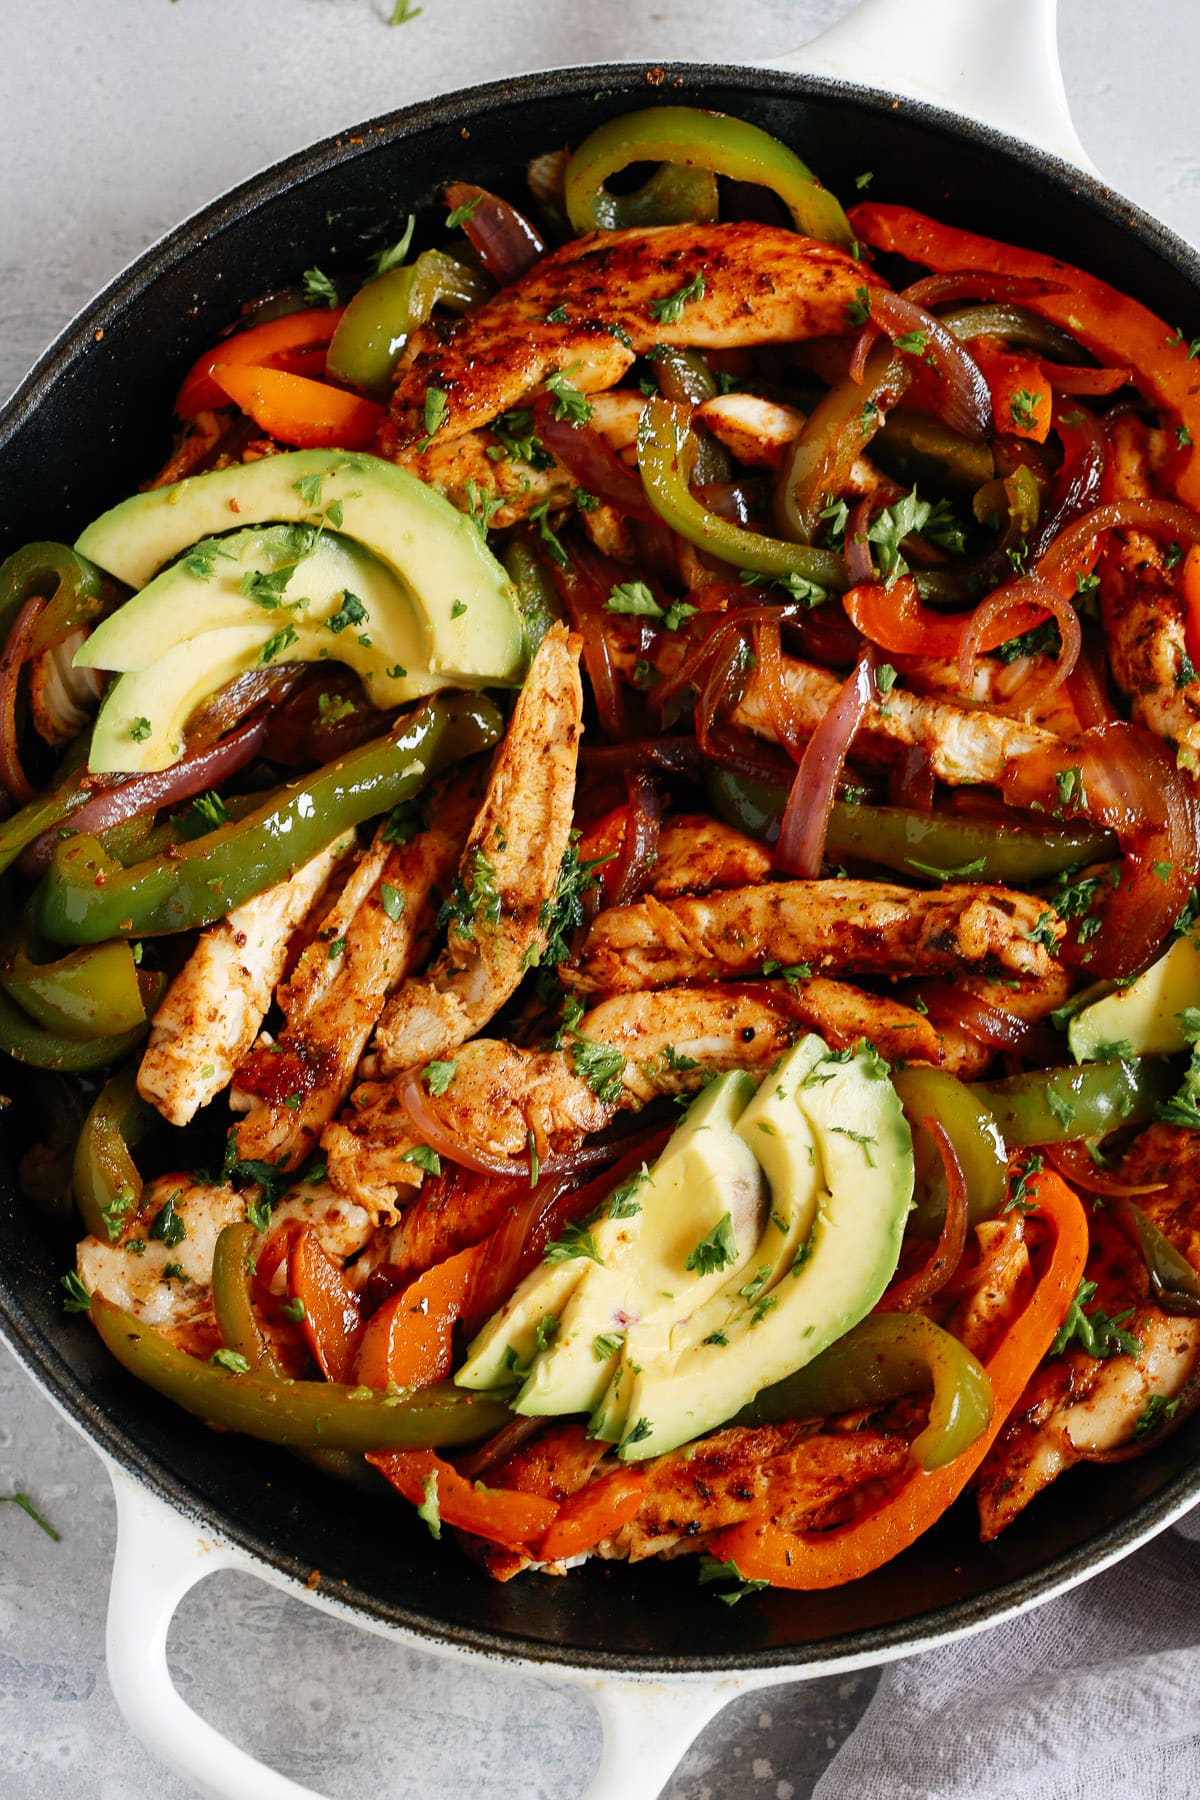 A white skillet with chicken fajitas, bell peppers, and avocado slices.